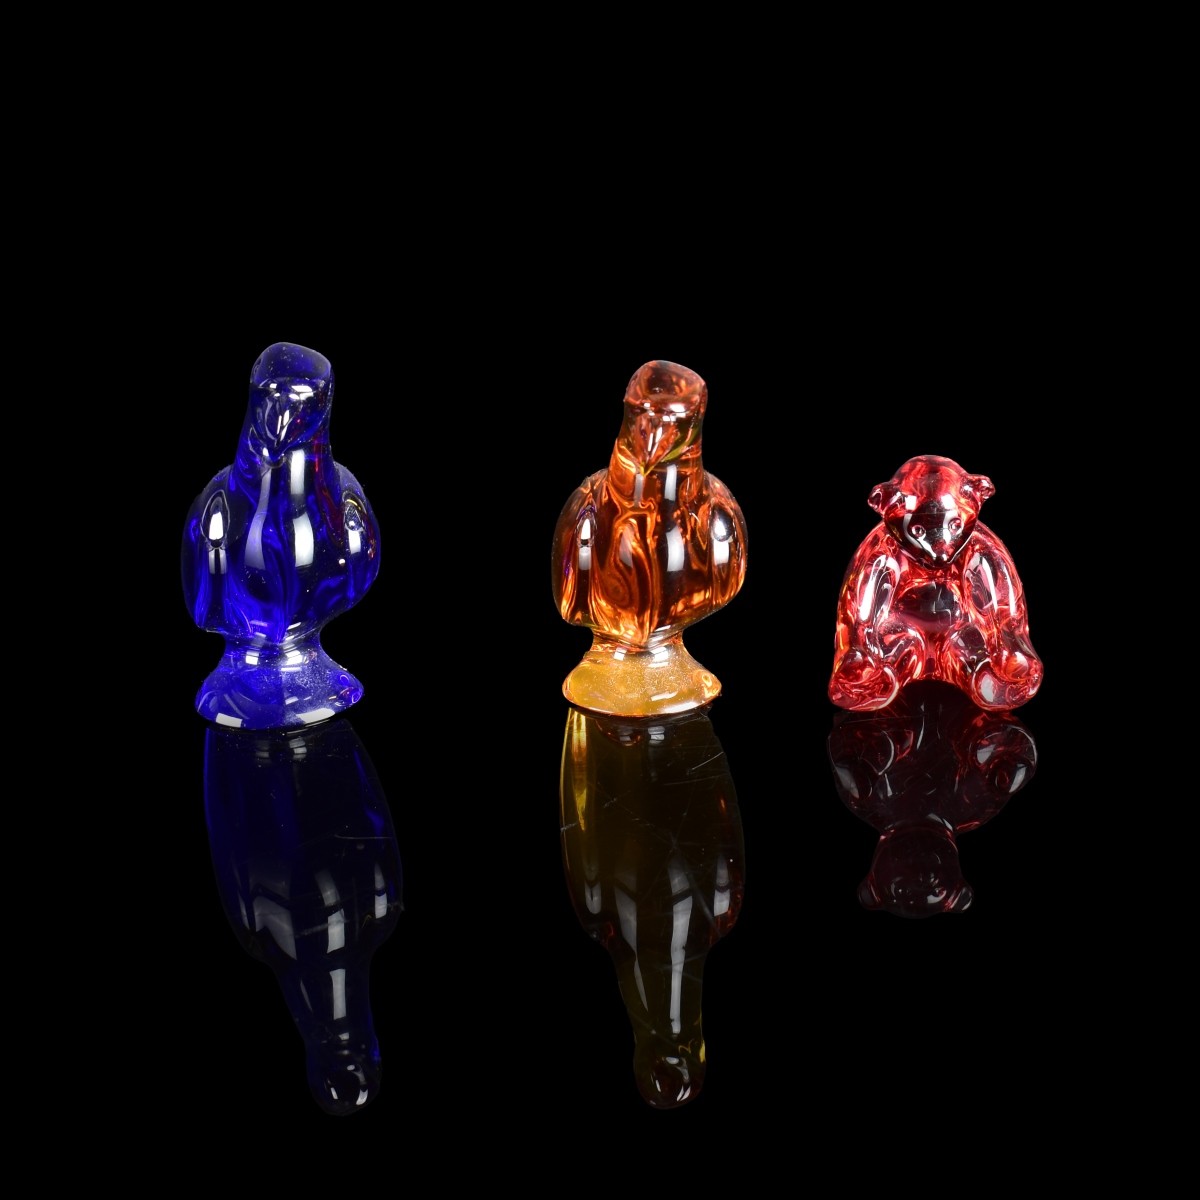 Three Baccarat Figurines / Paperweights